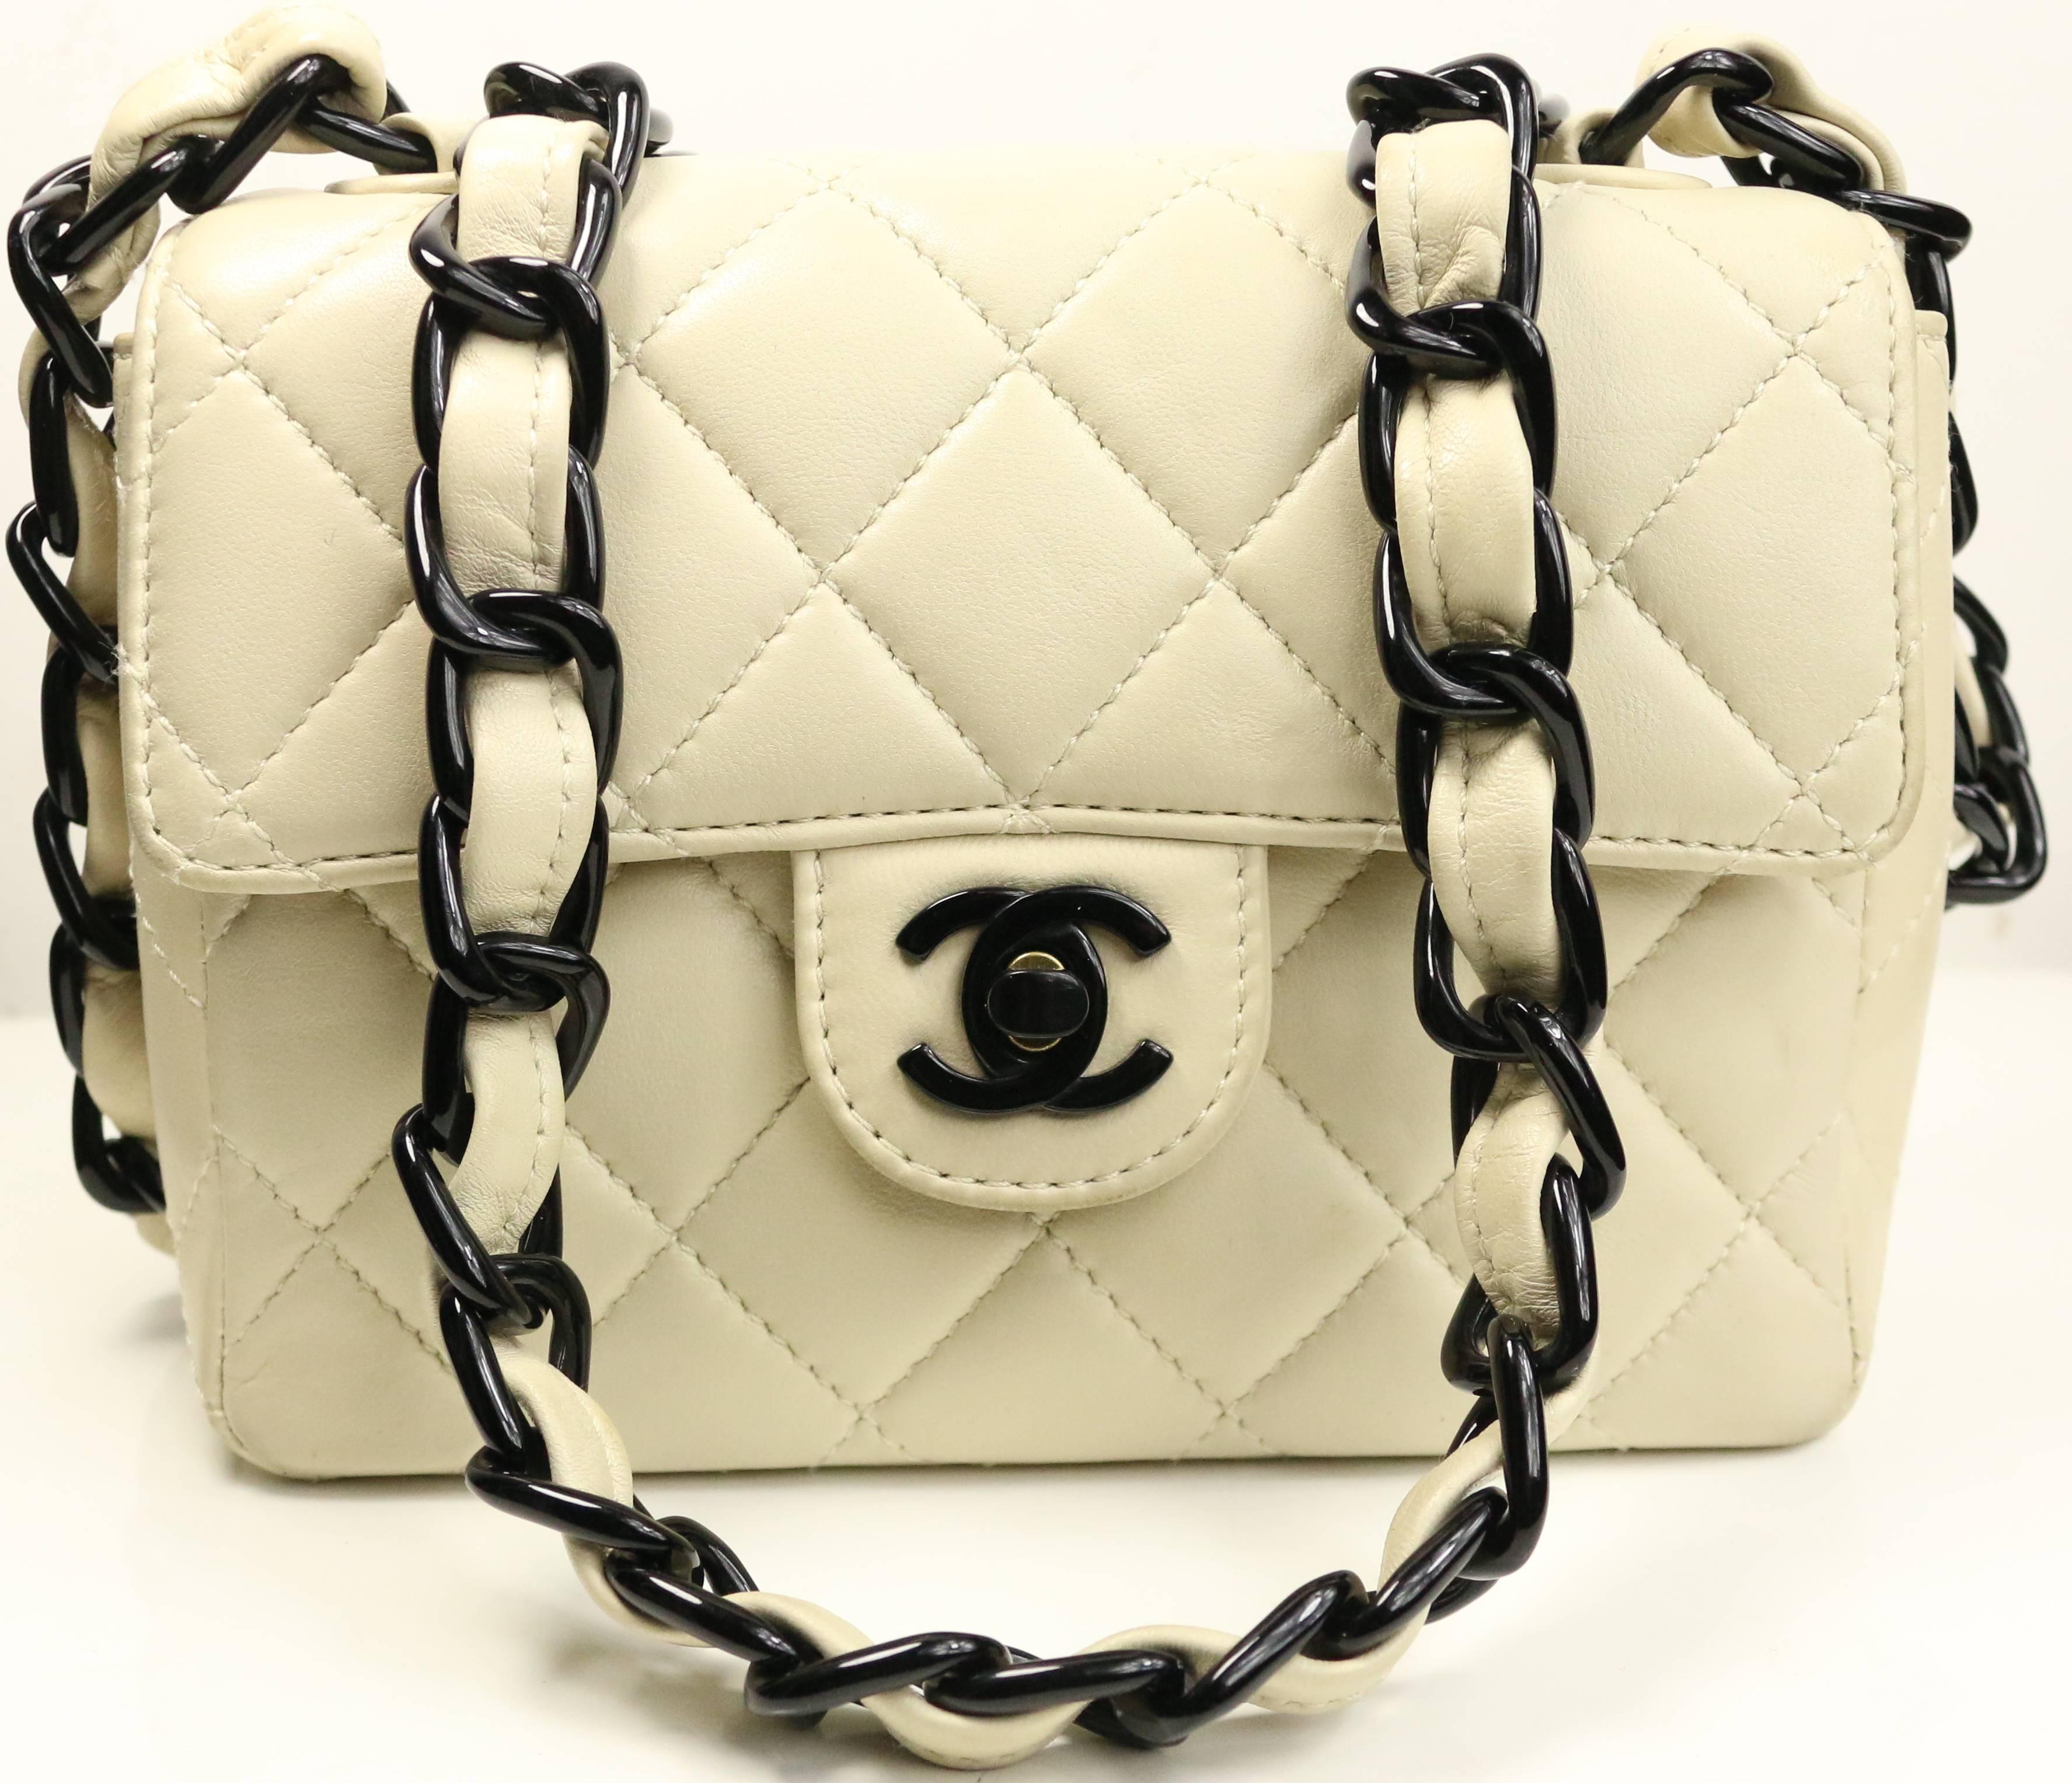 - Vintage 90s Chanel vanilla quilted lambskin leather with black vinyl chain strap leather mini flap bag. This classic quilted leather bag can be worn as cross body or shoulder. Signature black turn lock is made of vinyl. Featuring a back pocket and